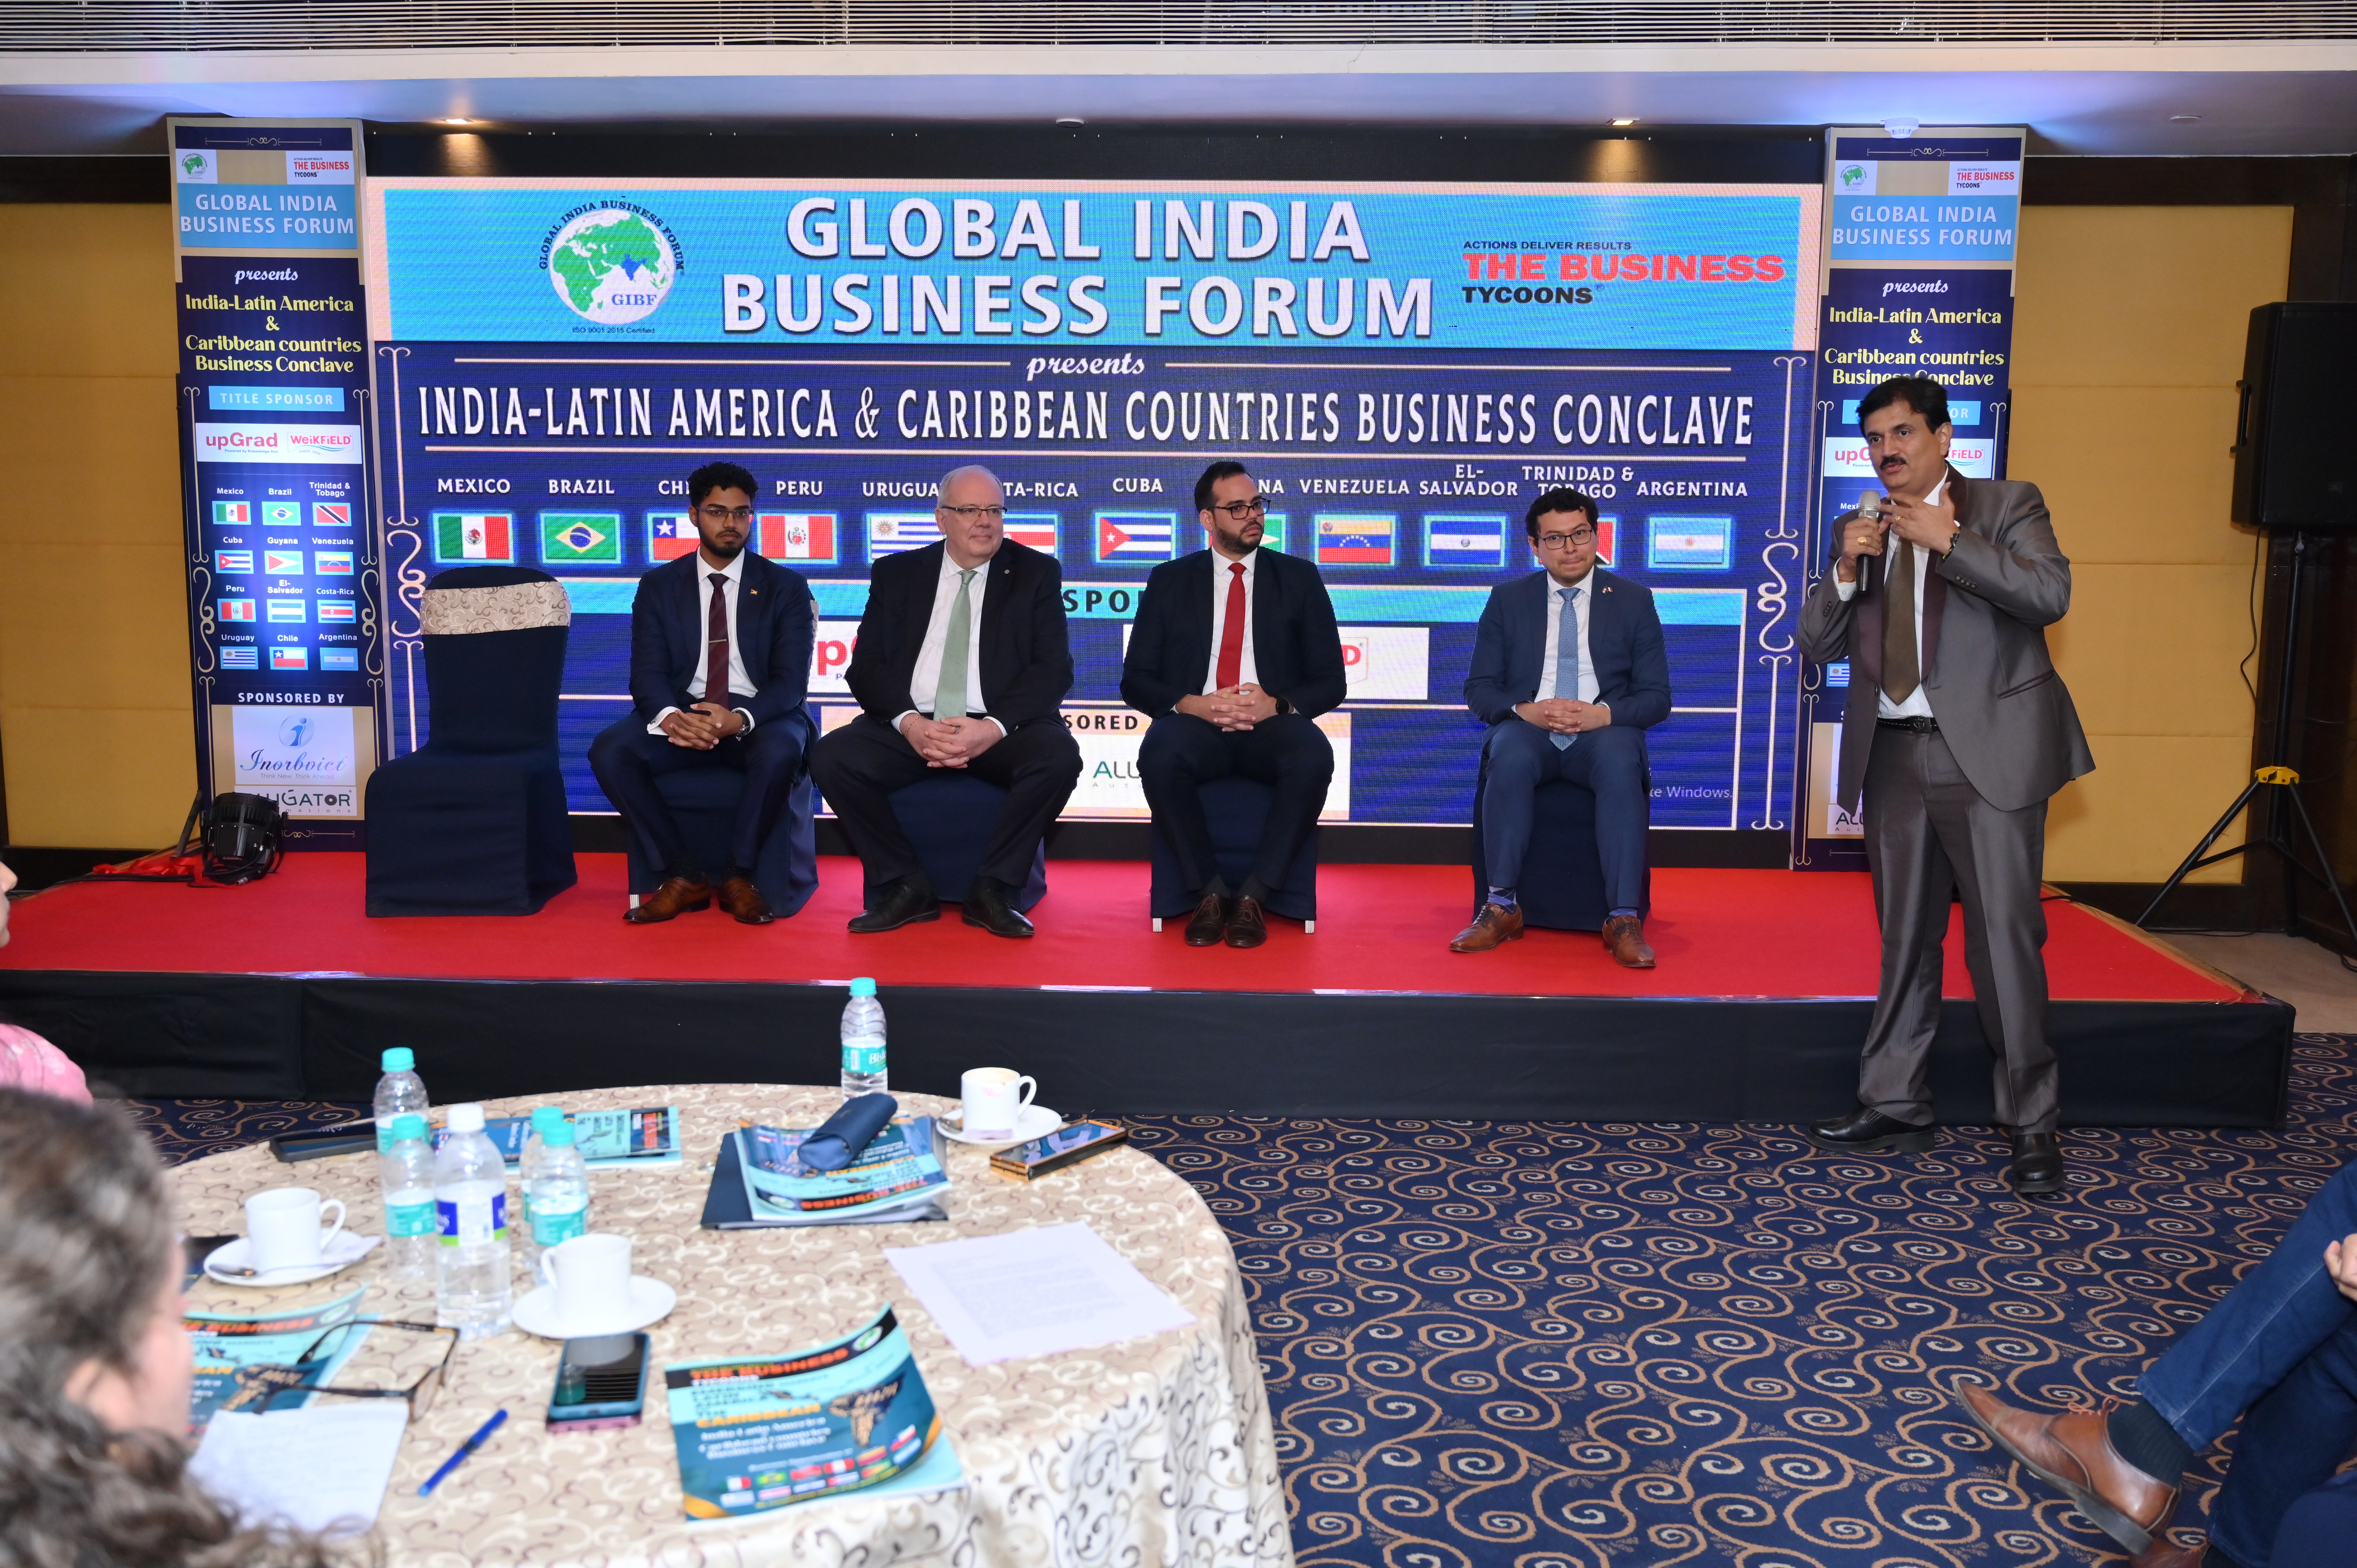 gibf-past-event-india-latin-america-and-caribbean-country-business-conclave-cuba-brazil-el-salvador-uruguay-b2b-meeting